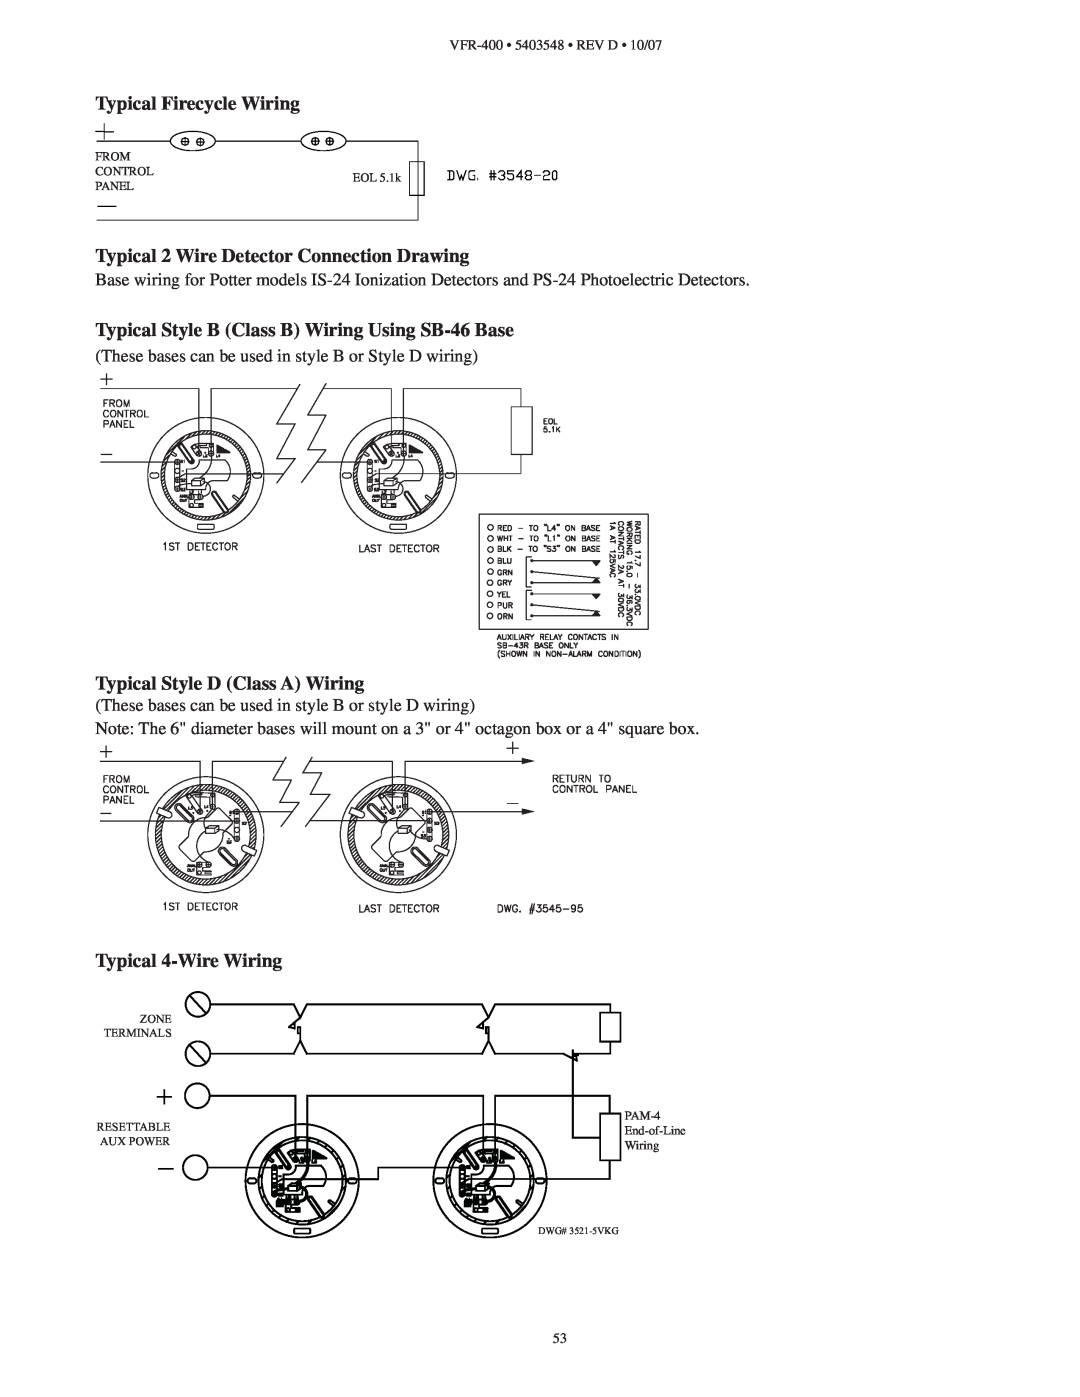 Viking VFR-400 Typical Firecycle Wiring, Typical 2 Wire Detector Connection Drawing, Typical Style D Class A Wiring 